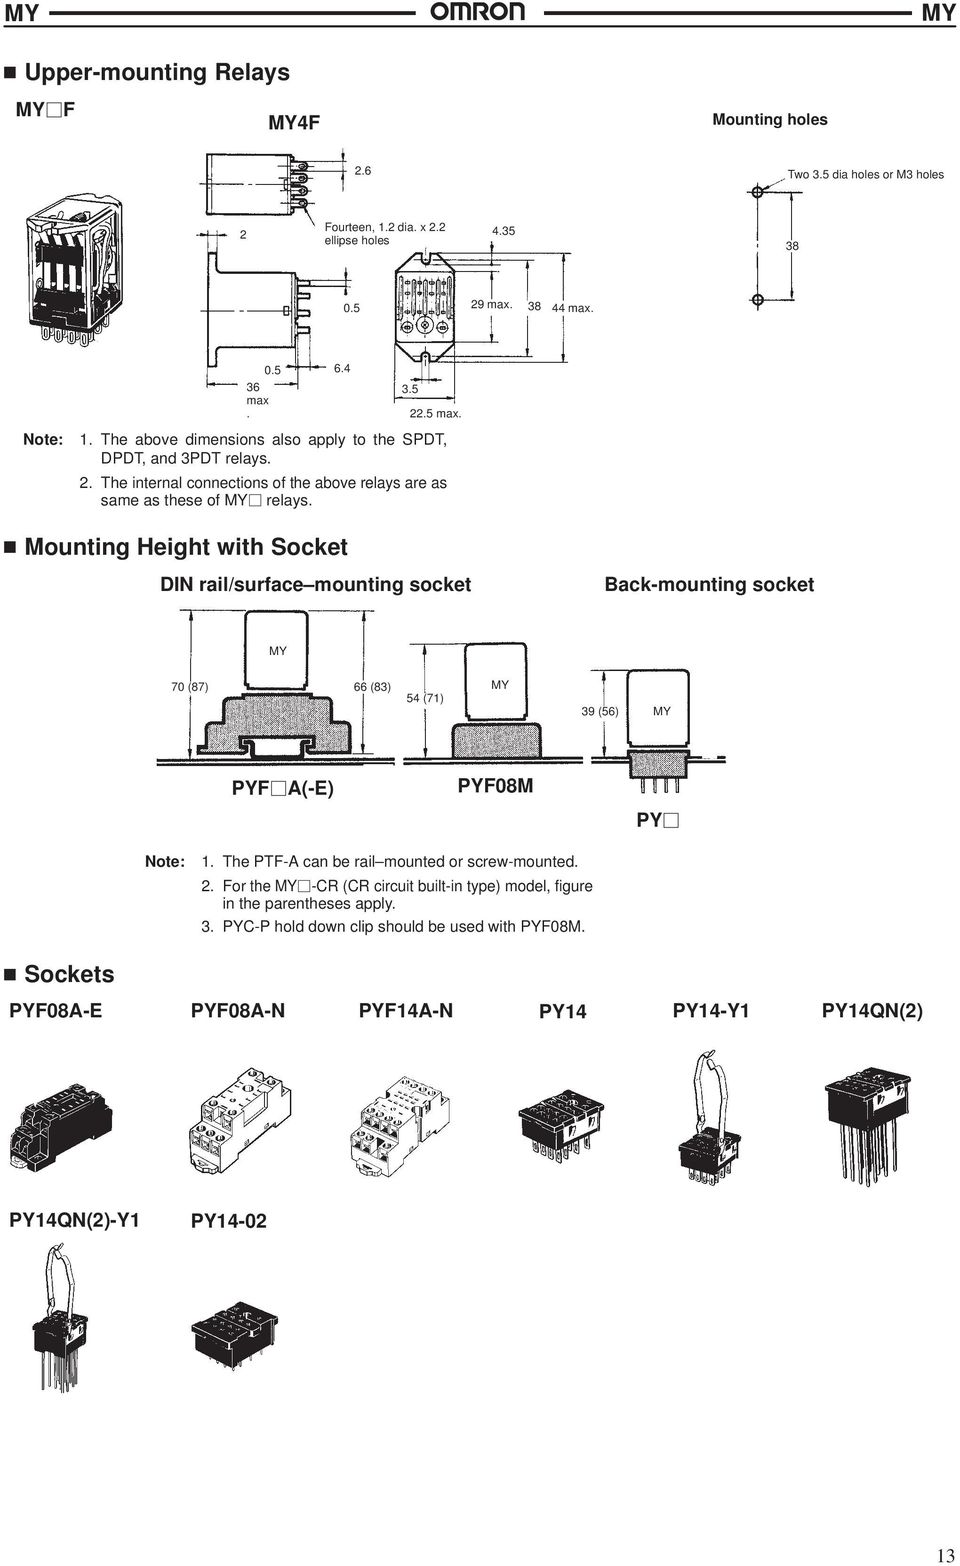 Mounting Height with Socket DIN rail/surface mounting socket Back-mounting socket 70 (87) 66 (8) 54 (71) 9 (56) PYF A(-E) PYF08M PY 1.